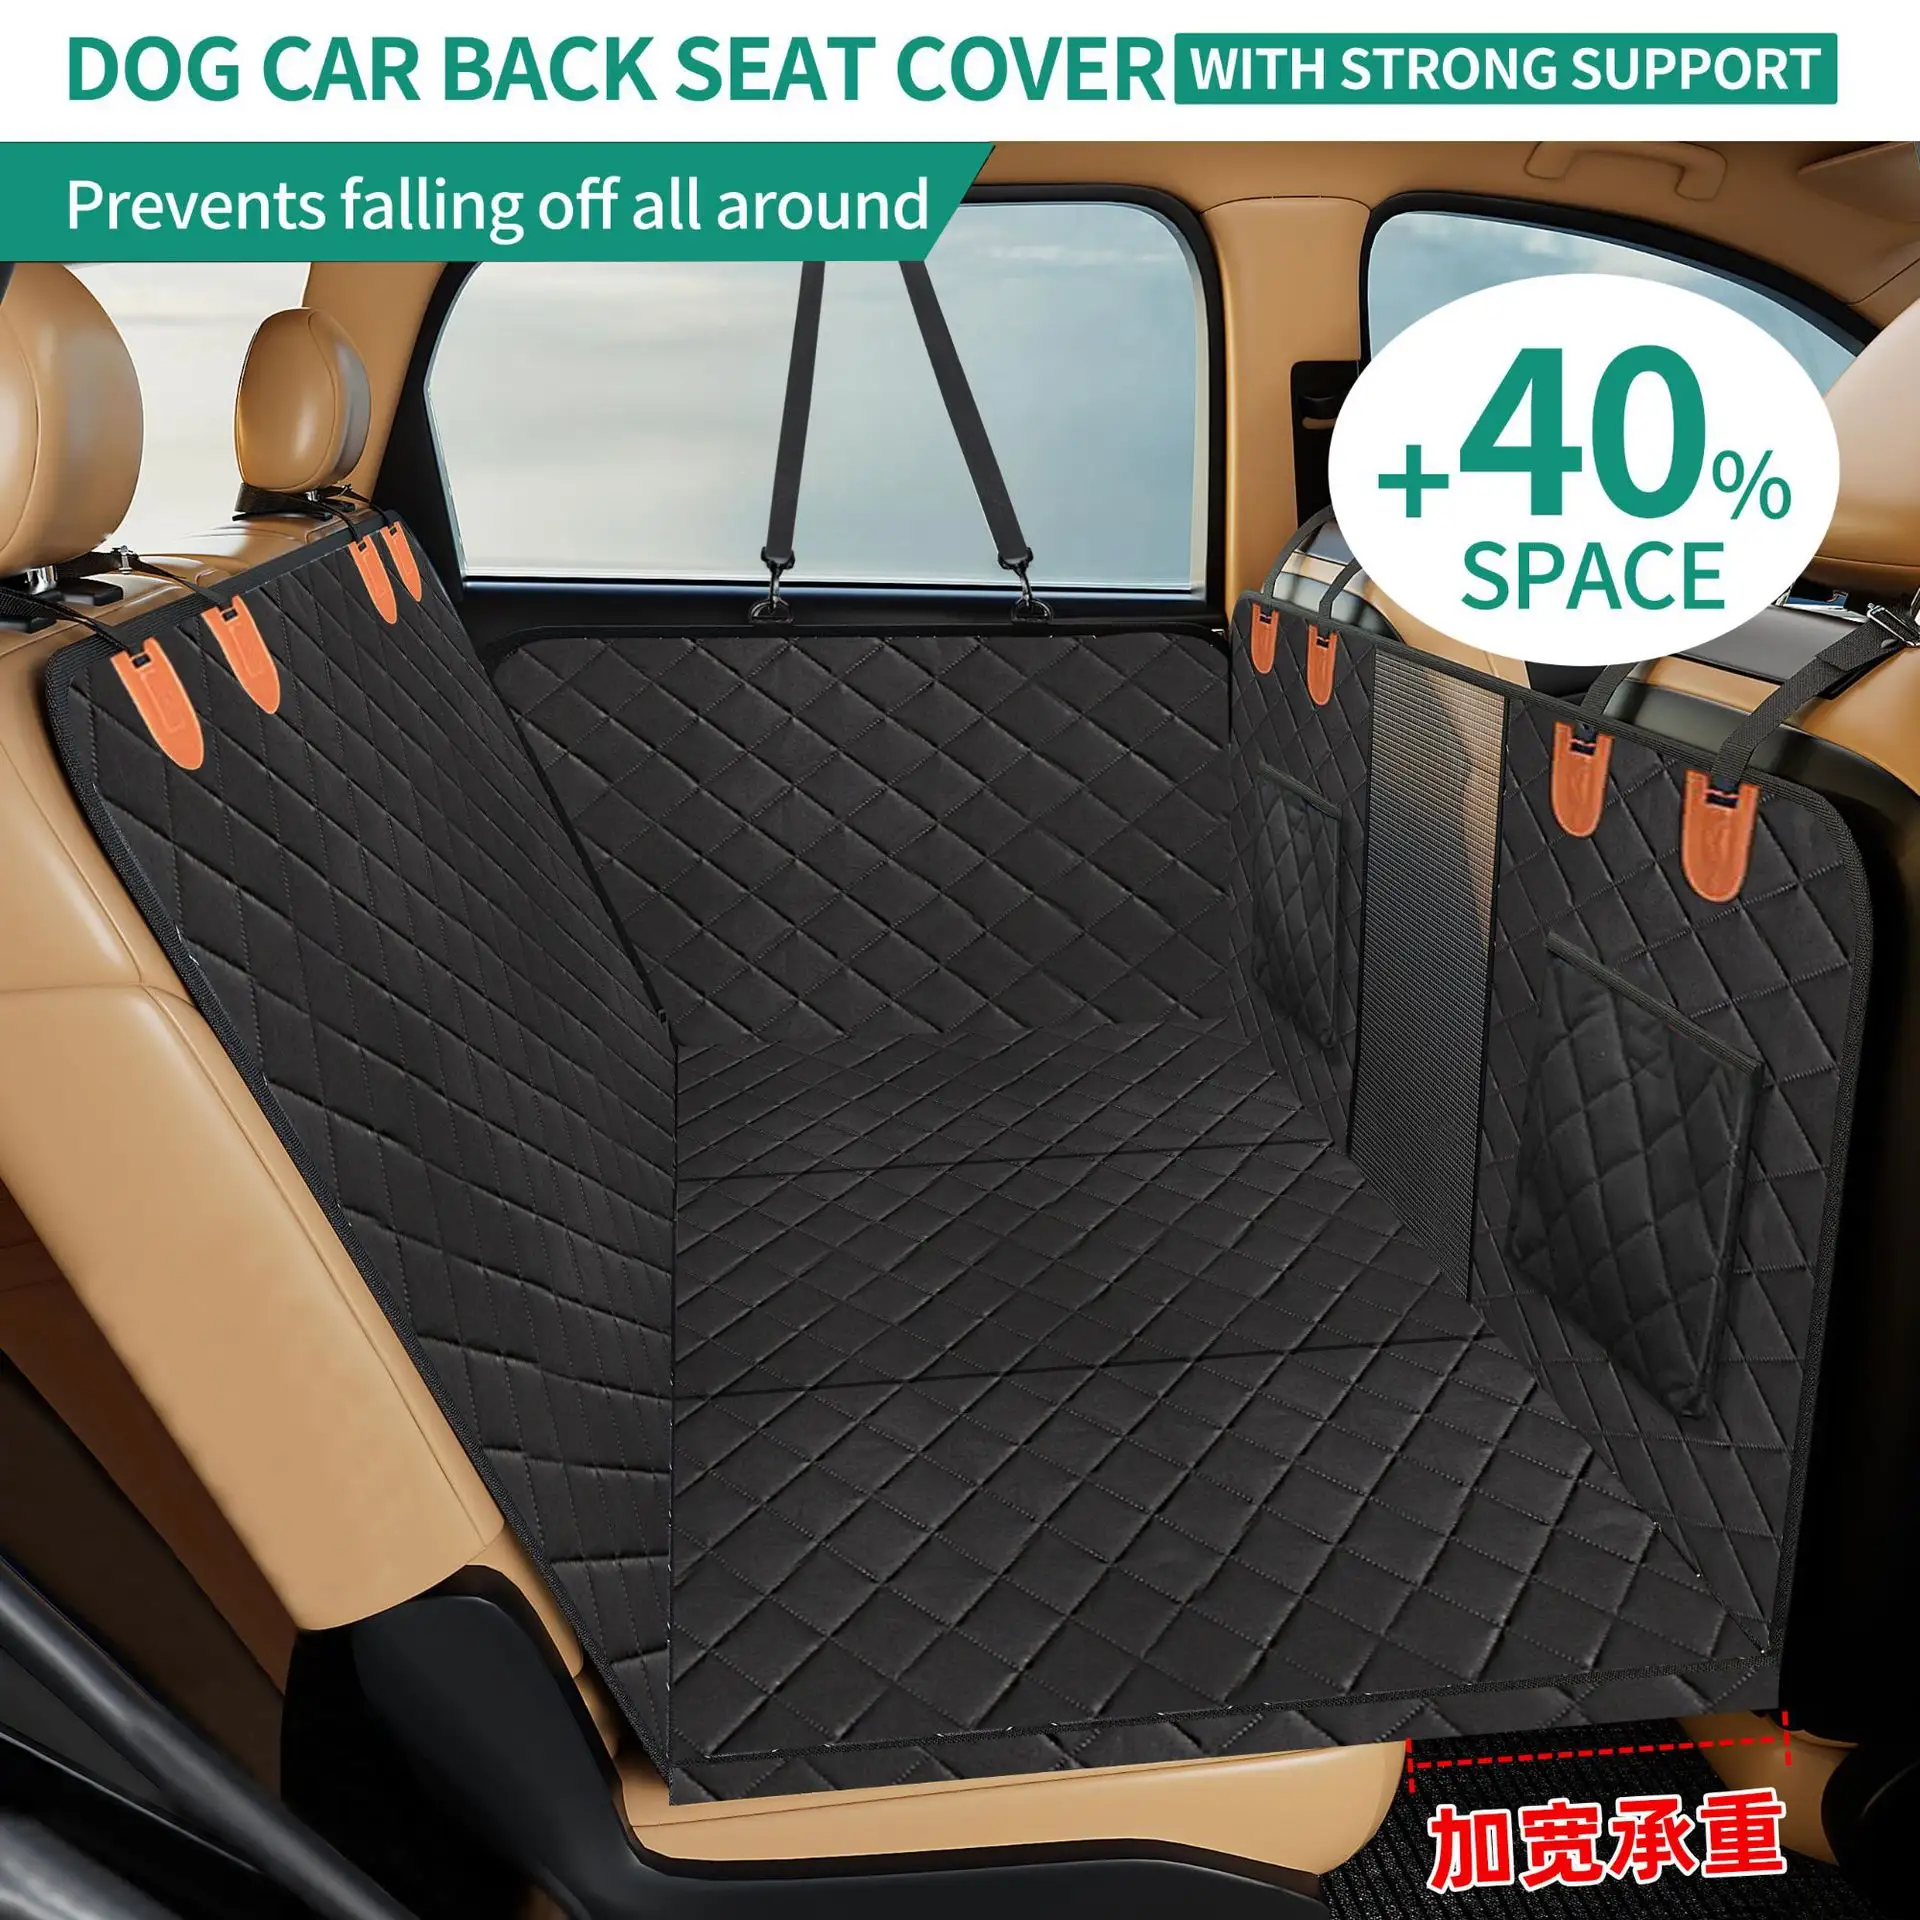 Seat Extender with Mesh Window Dog Backseat Cover for Cars Stock Waterproof Hard Bottom Hammock for Car Travel